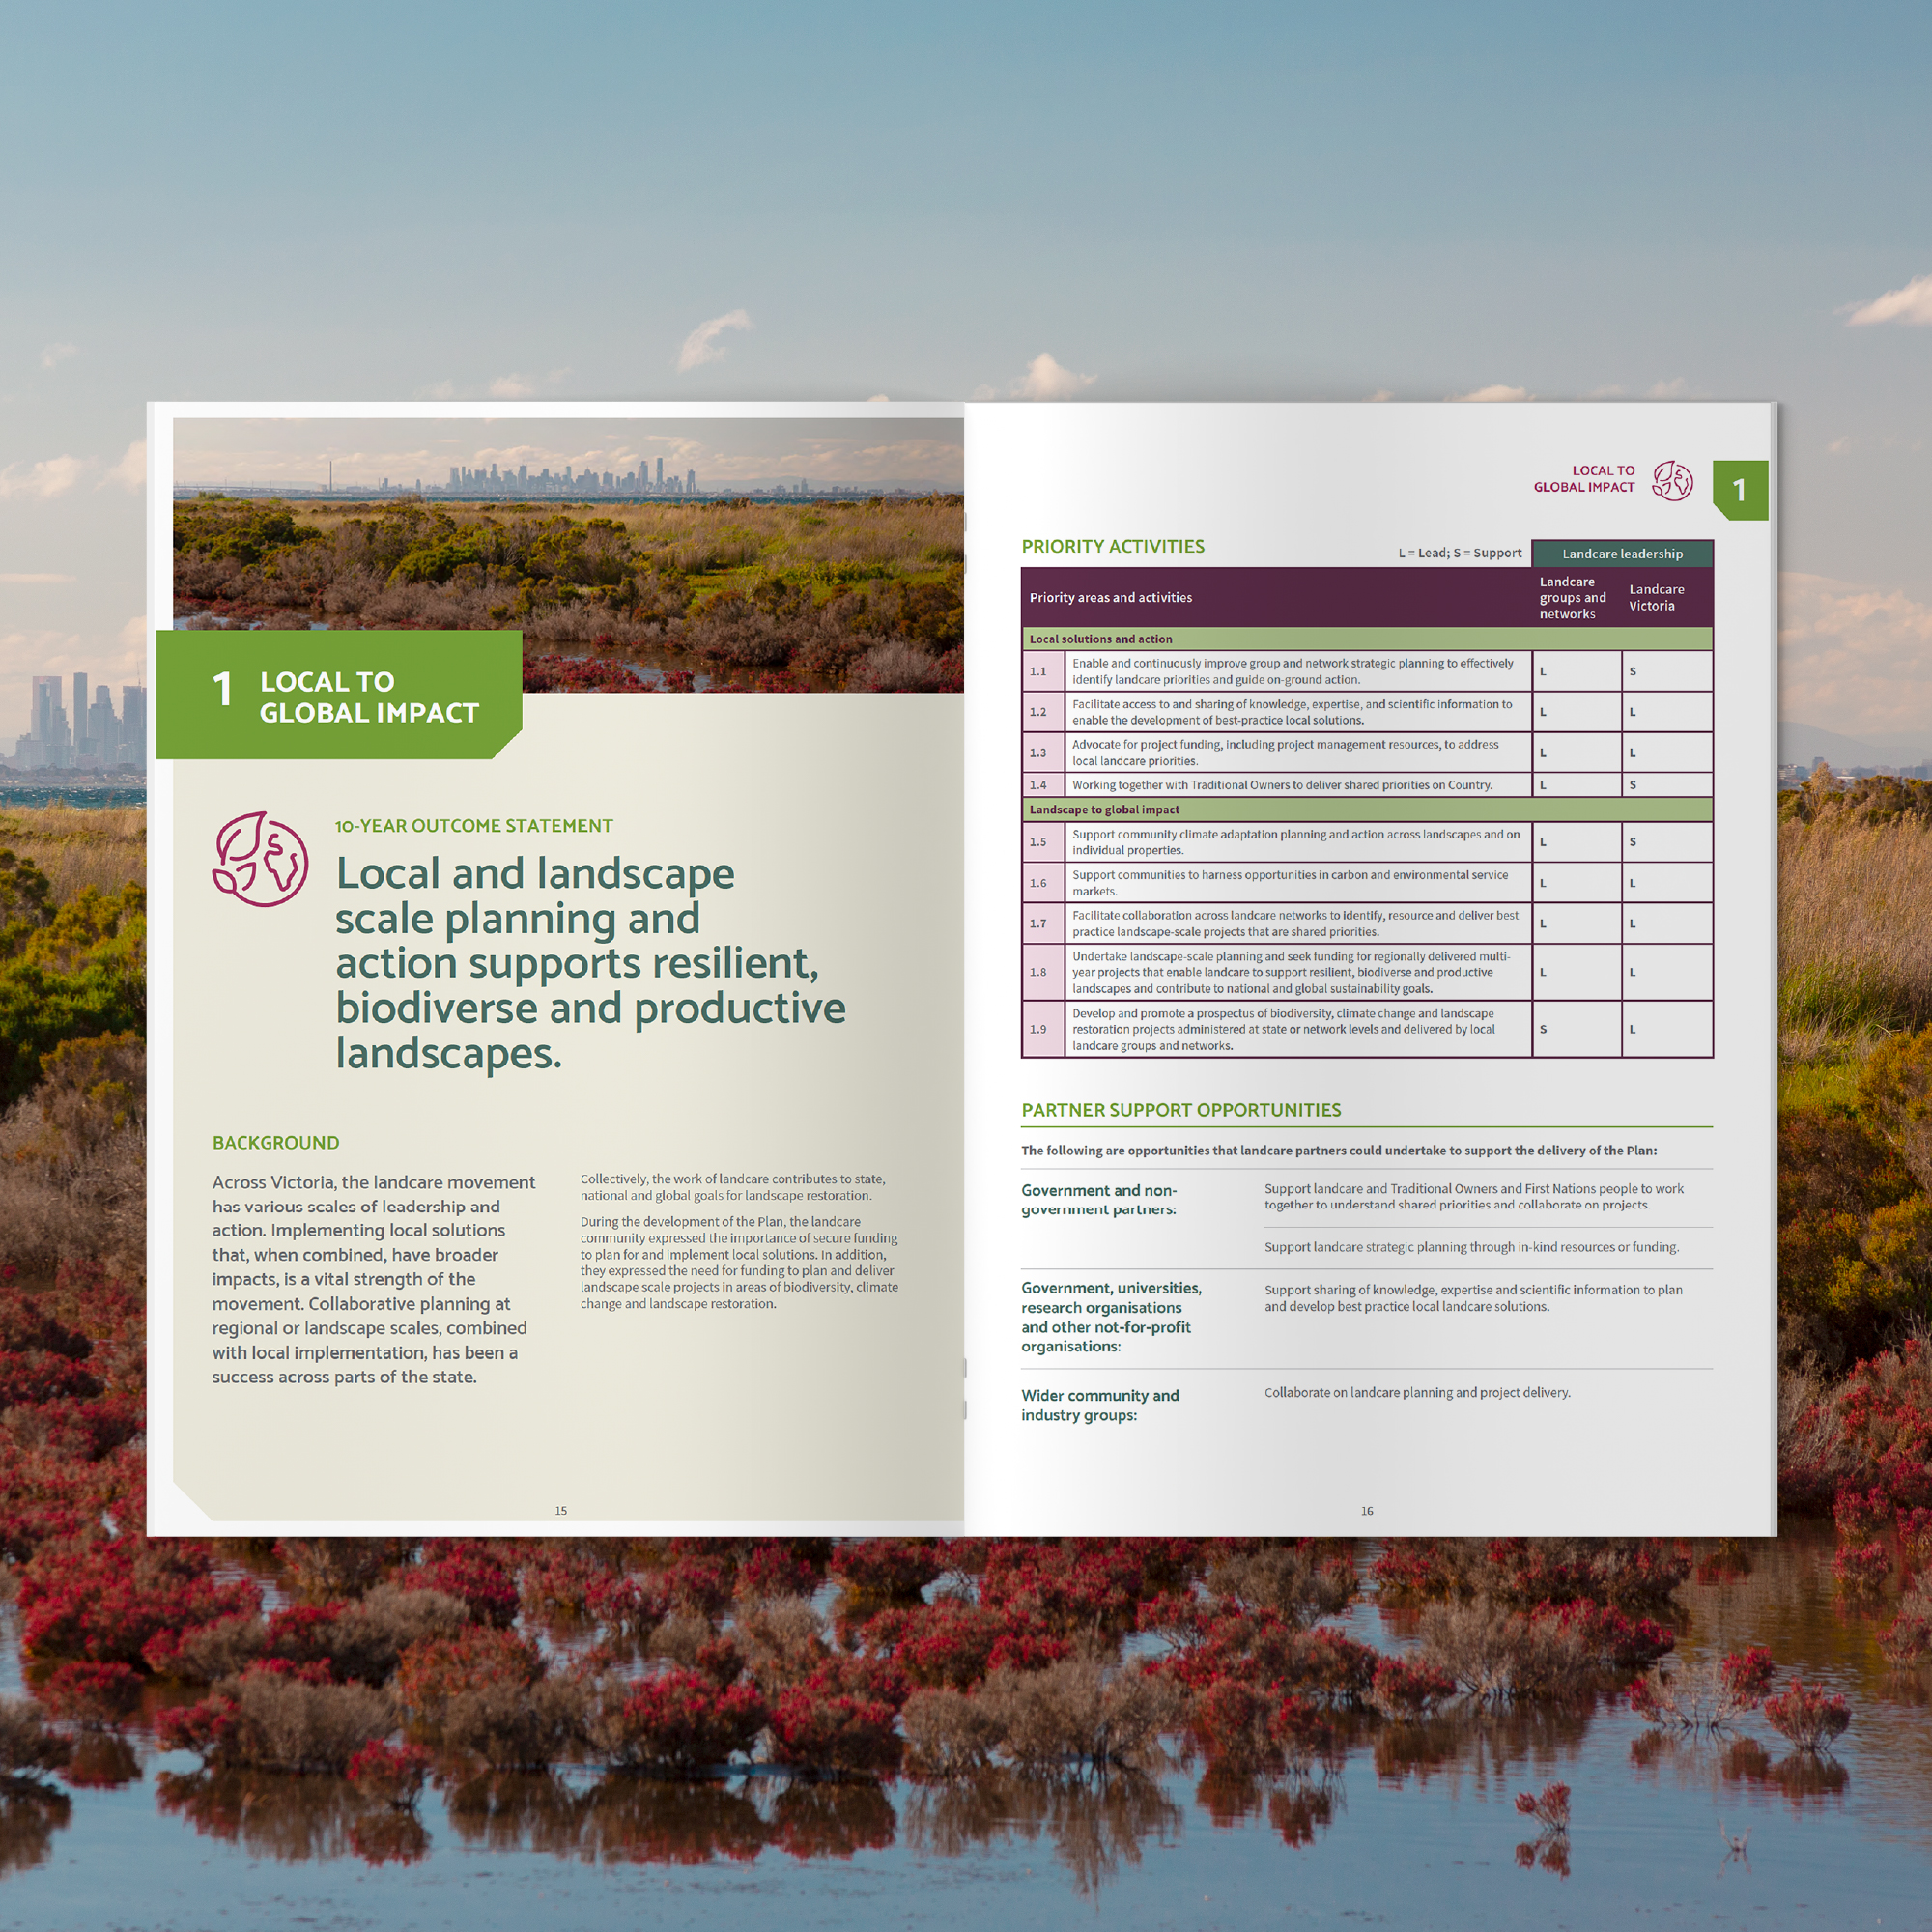 Full colour mockup of the Landcare Plan for Victoria 2023-2033 'Item 1' spread titled 'Local to Global Impact'. Melbourne cityscape is featured in an image on the spread, along with relevant text relating to the first strategic plan point.